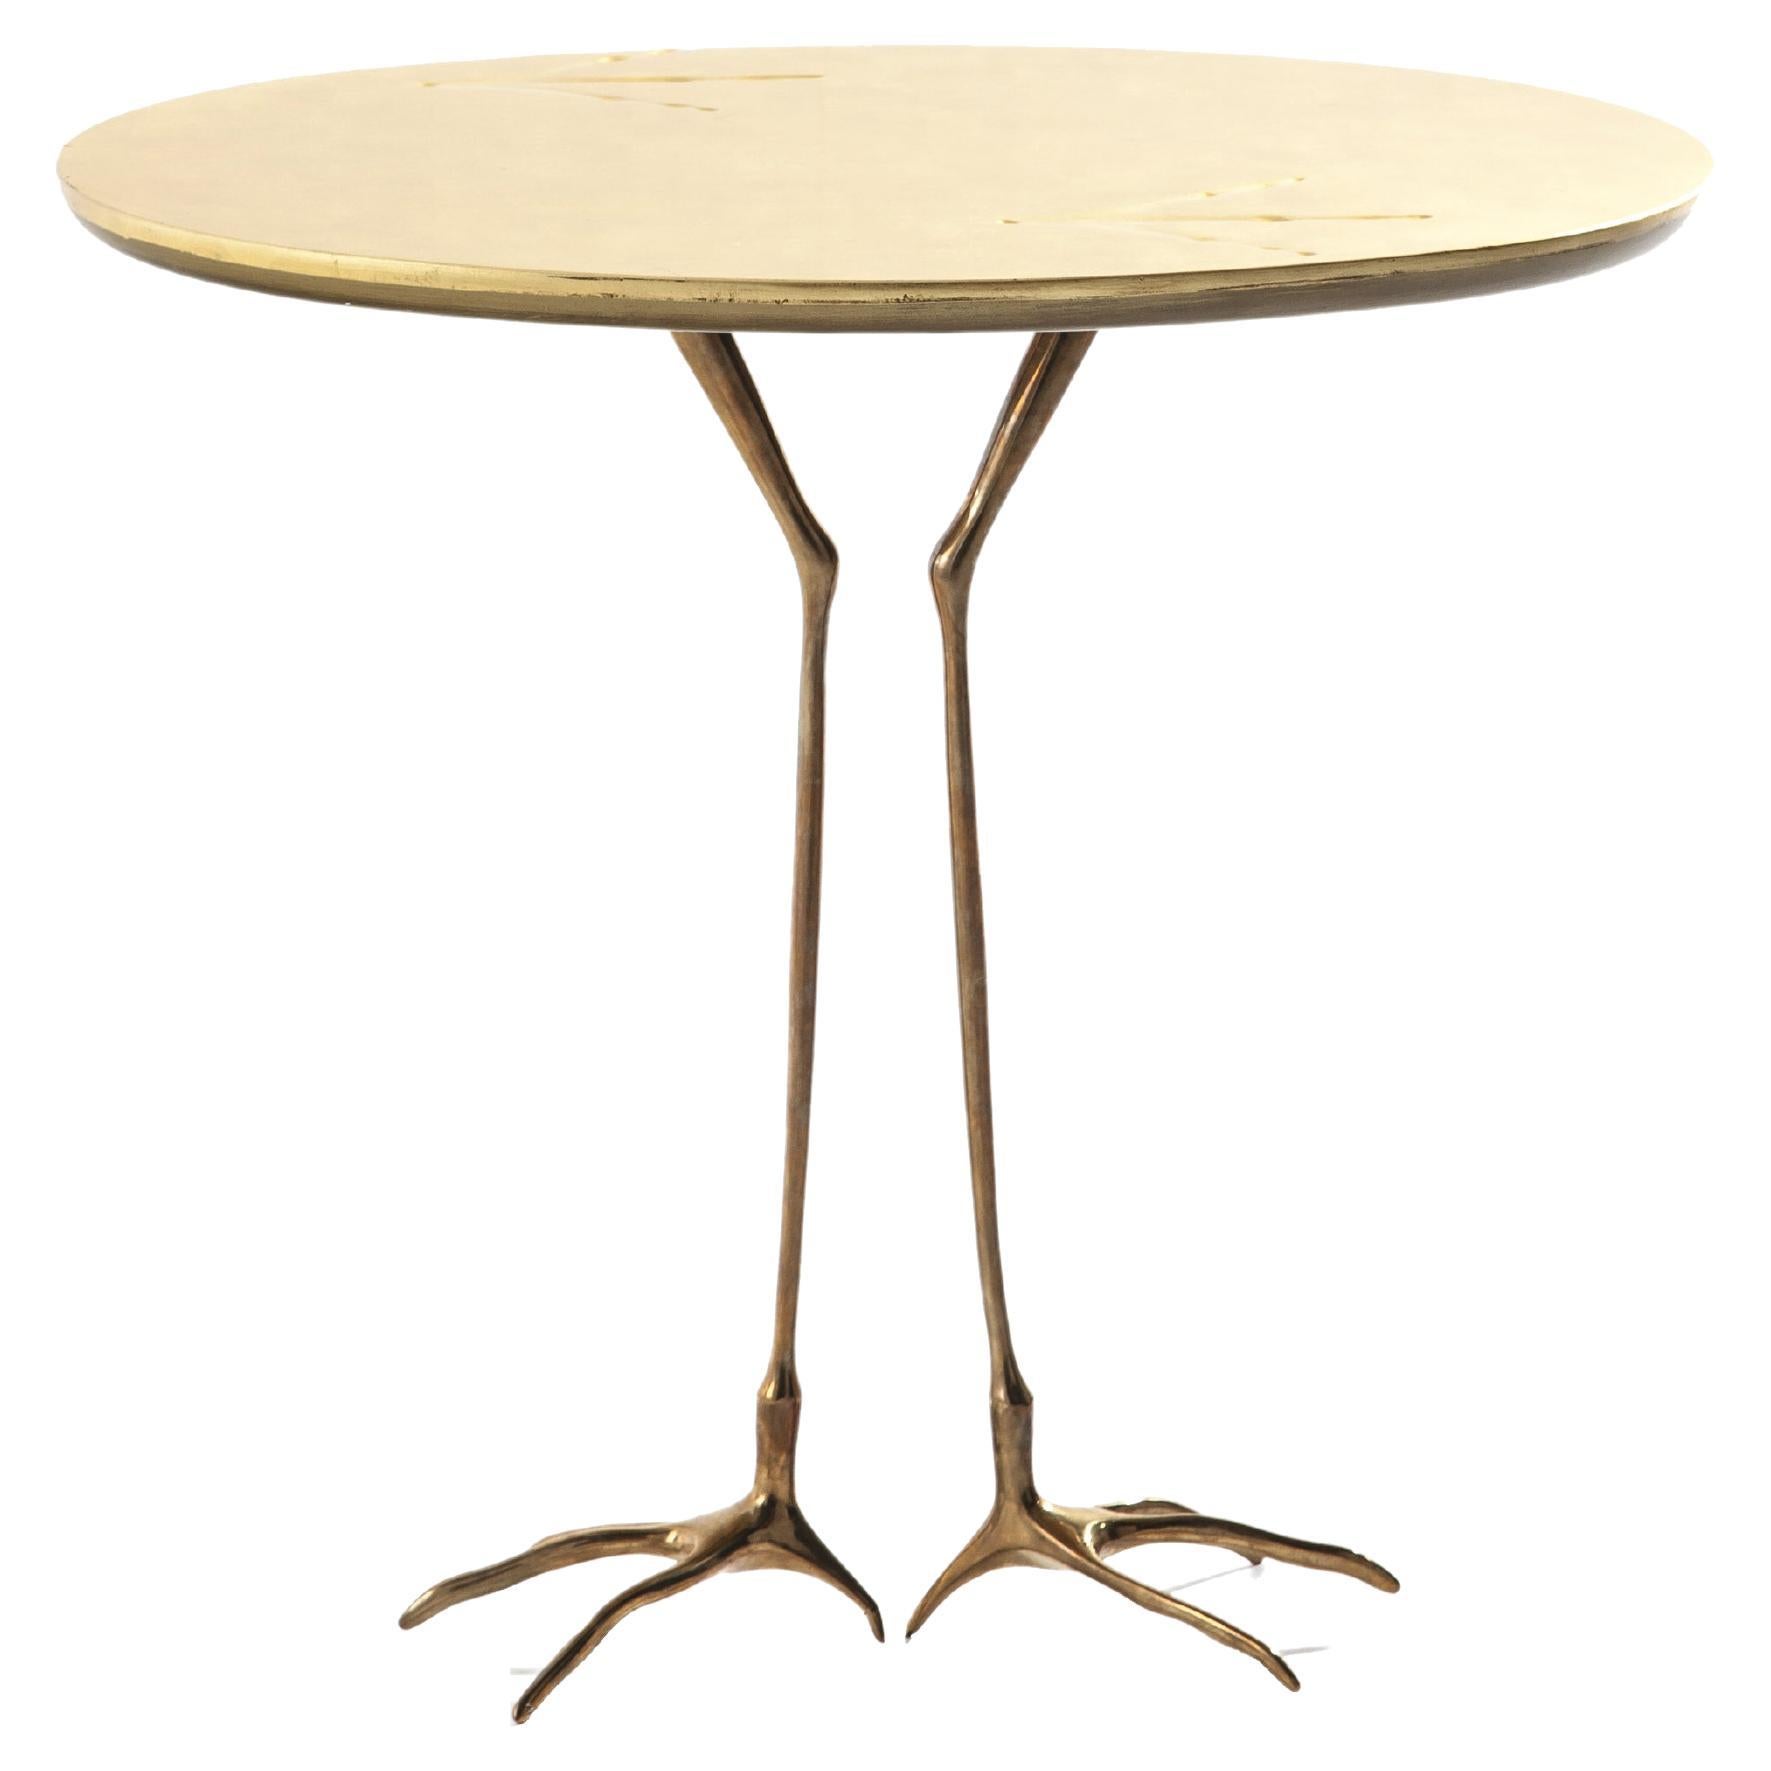 Meret Oppenheim traccia sculptural table.
Manufactured by Cassina in Italy.

In 1971, Dino Gavino launched what he called “l’opera d’arte funzionale”, or functional artworks, in so doing inaugurating a new approach of furnishing where surreal